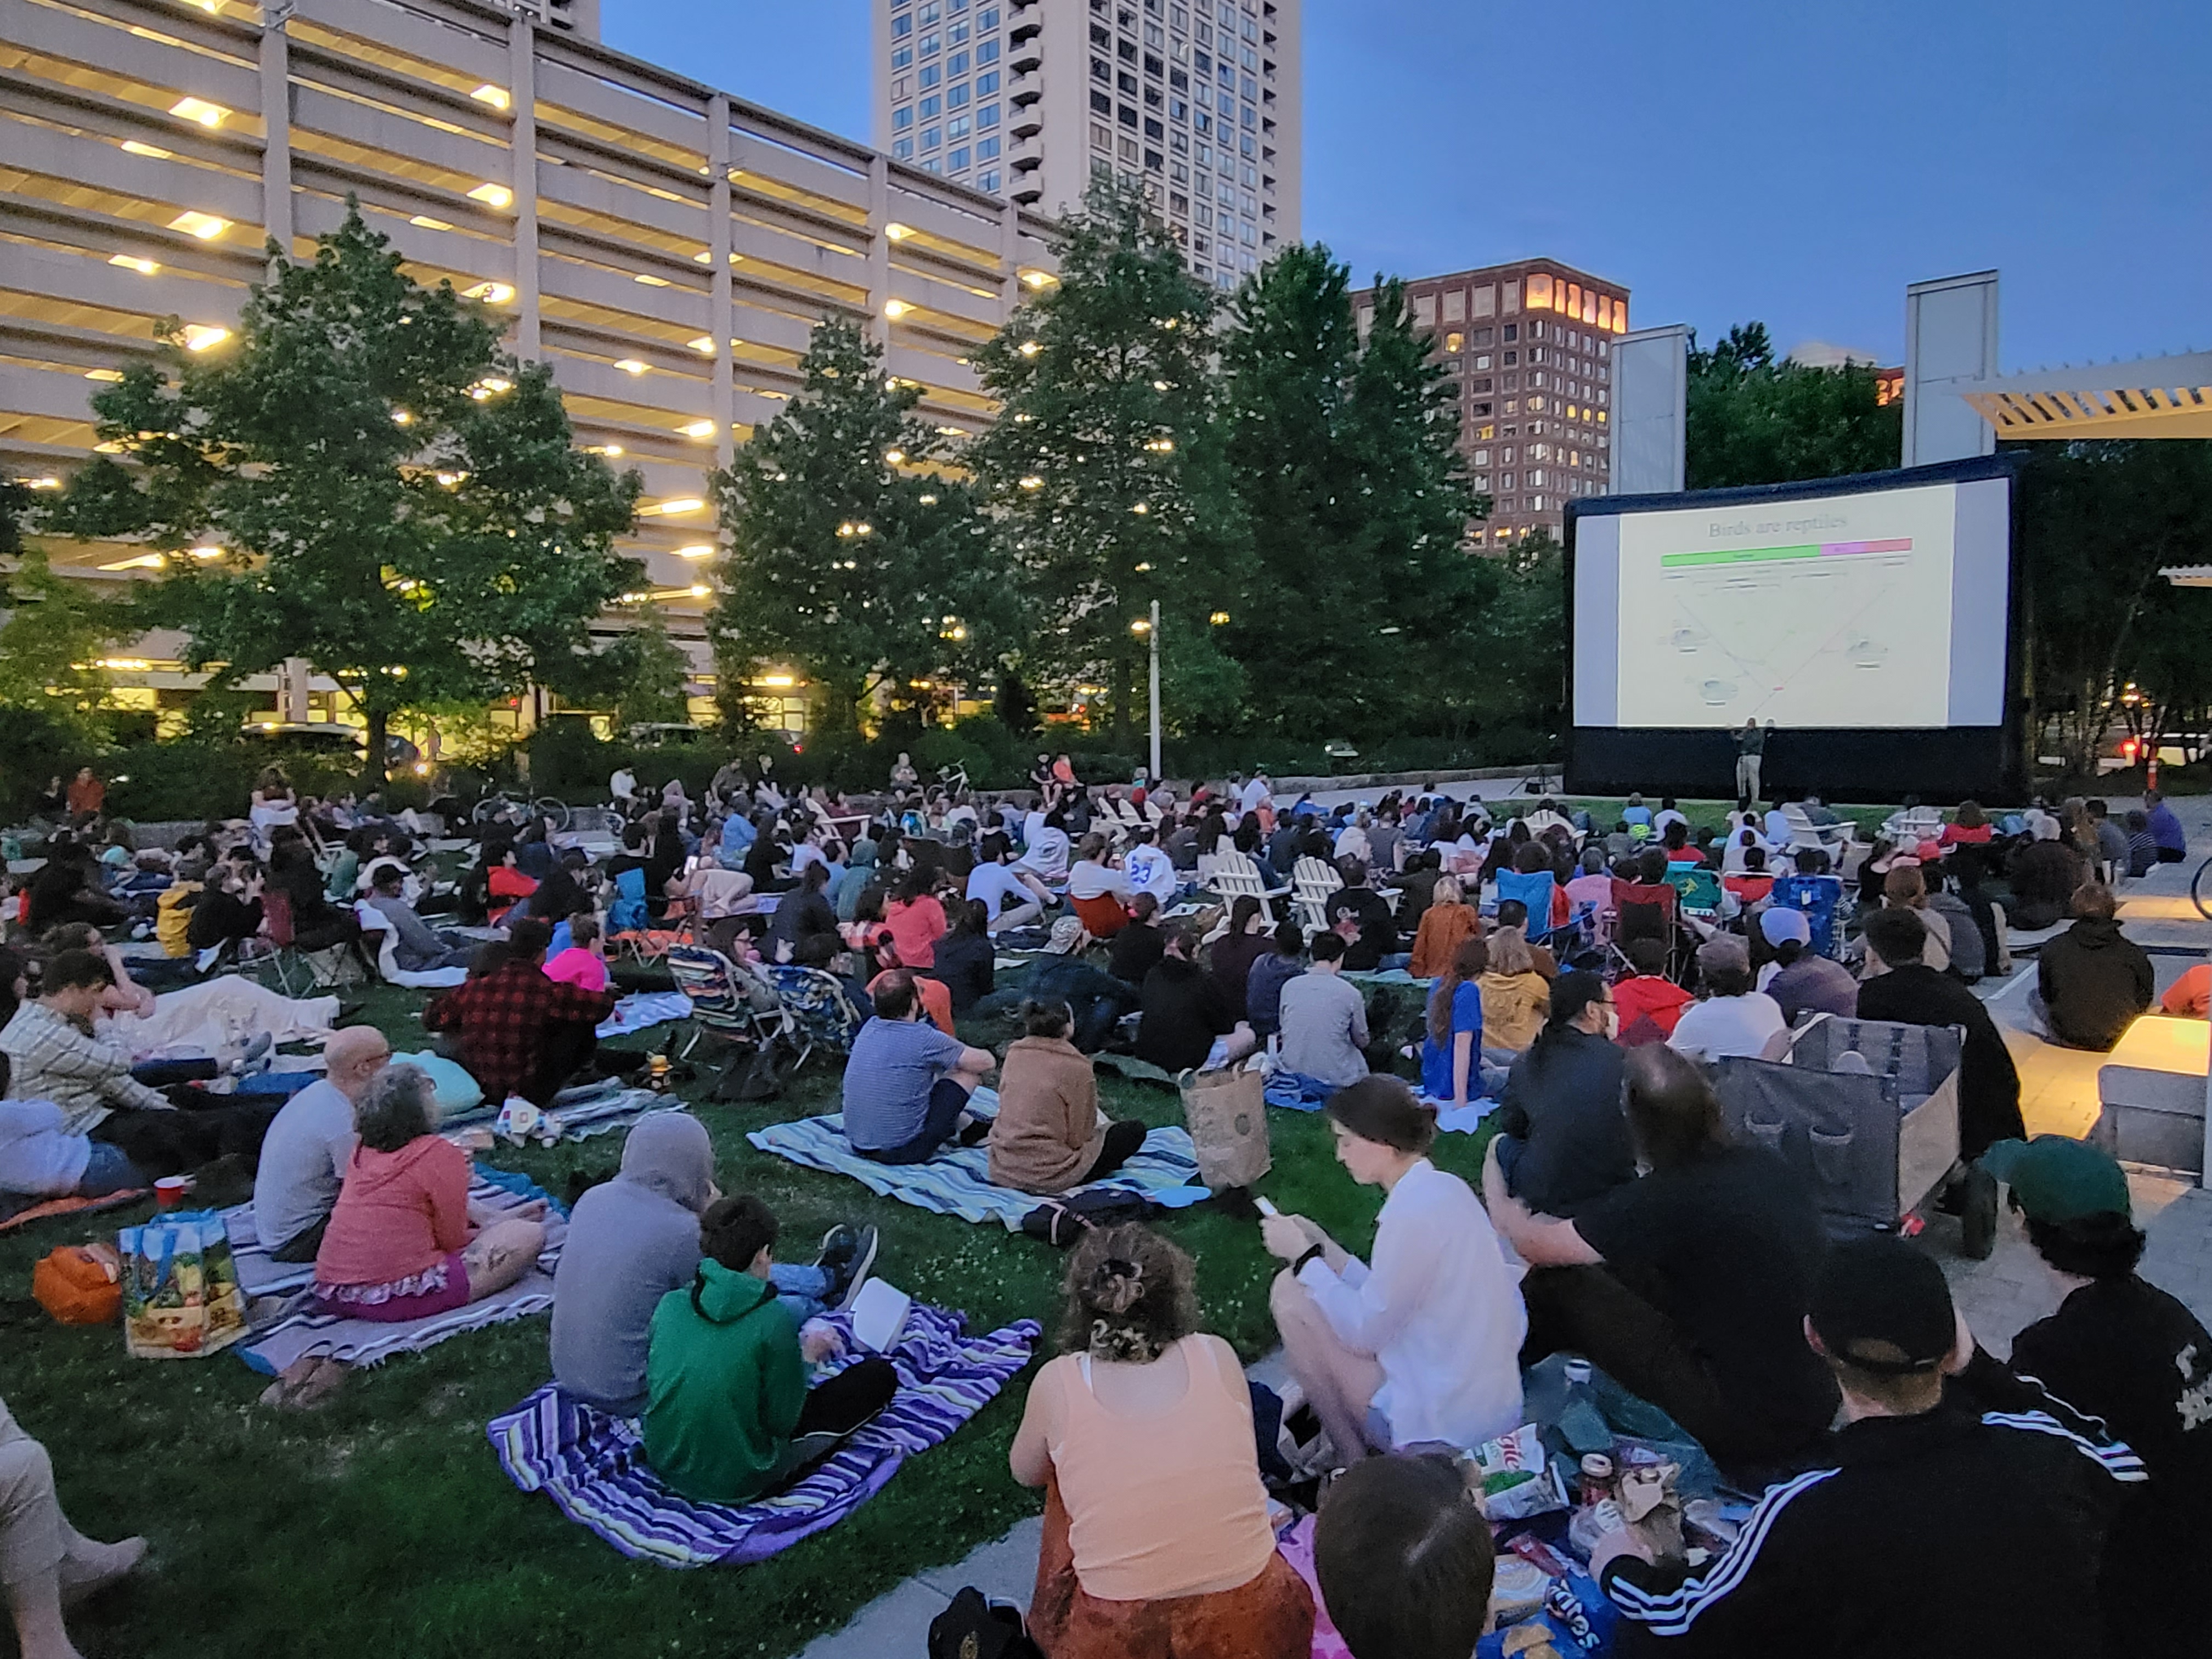 People gathered at the Greenway watching an outdoor movie